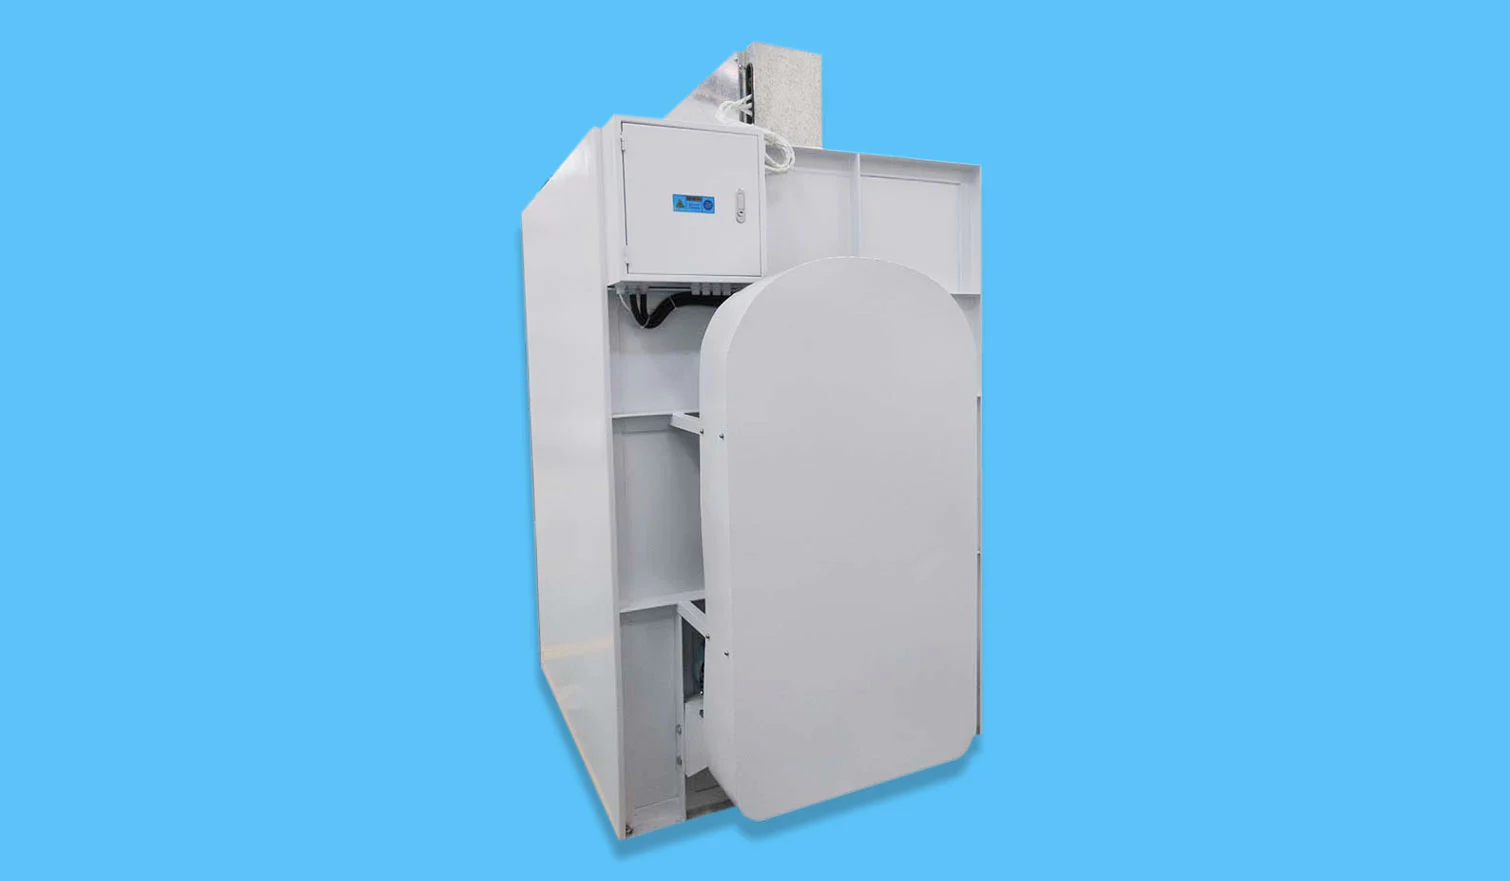 GOWORLD high quality laundry dryer machine easy use for inns